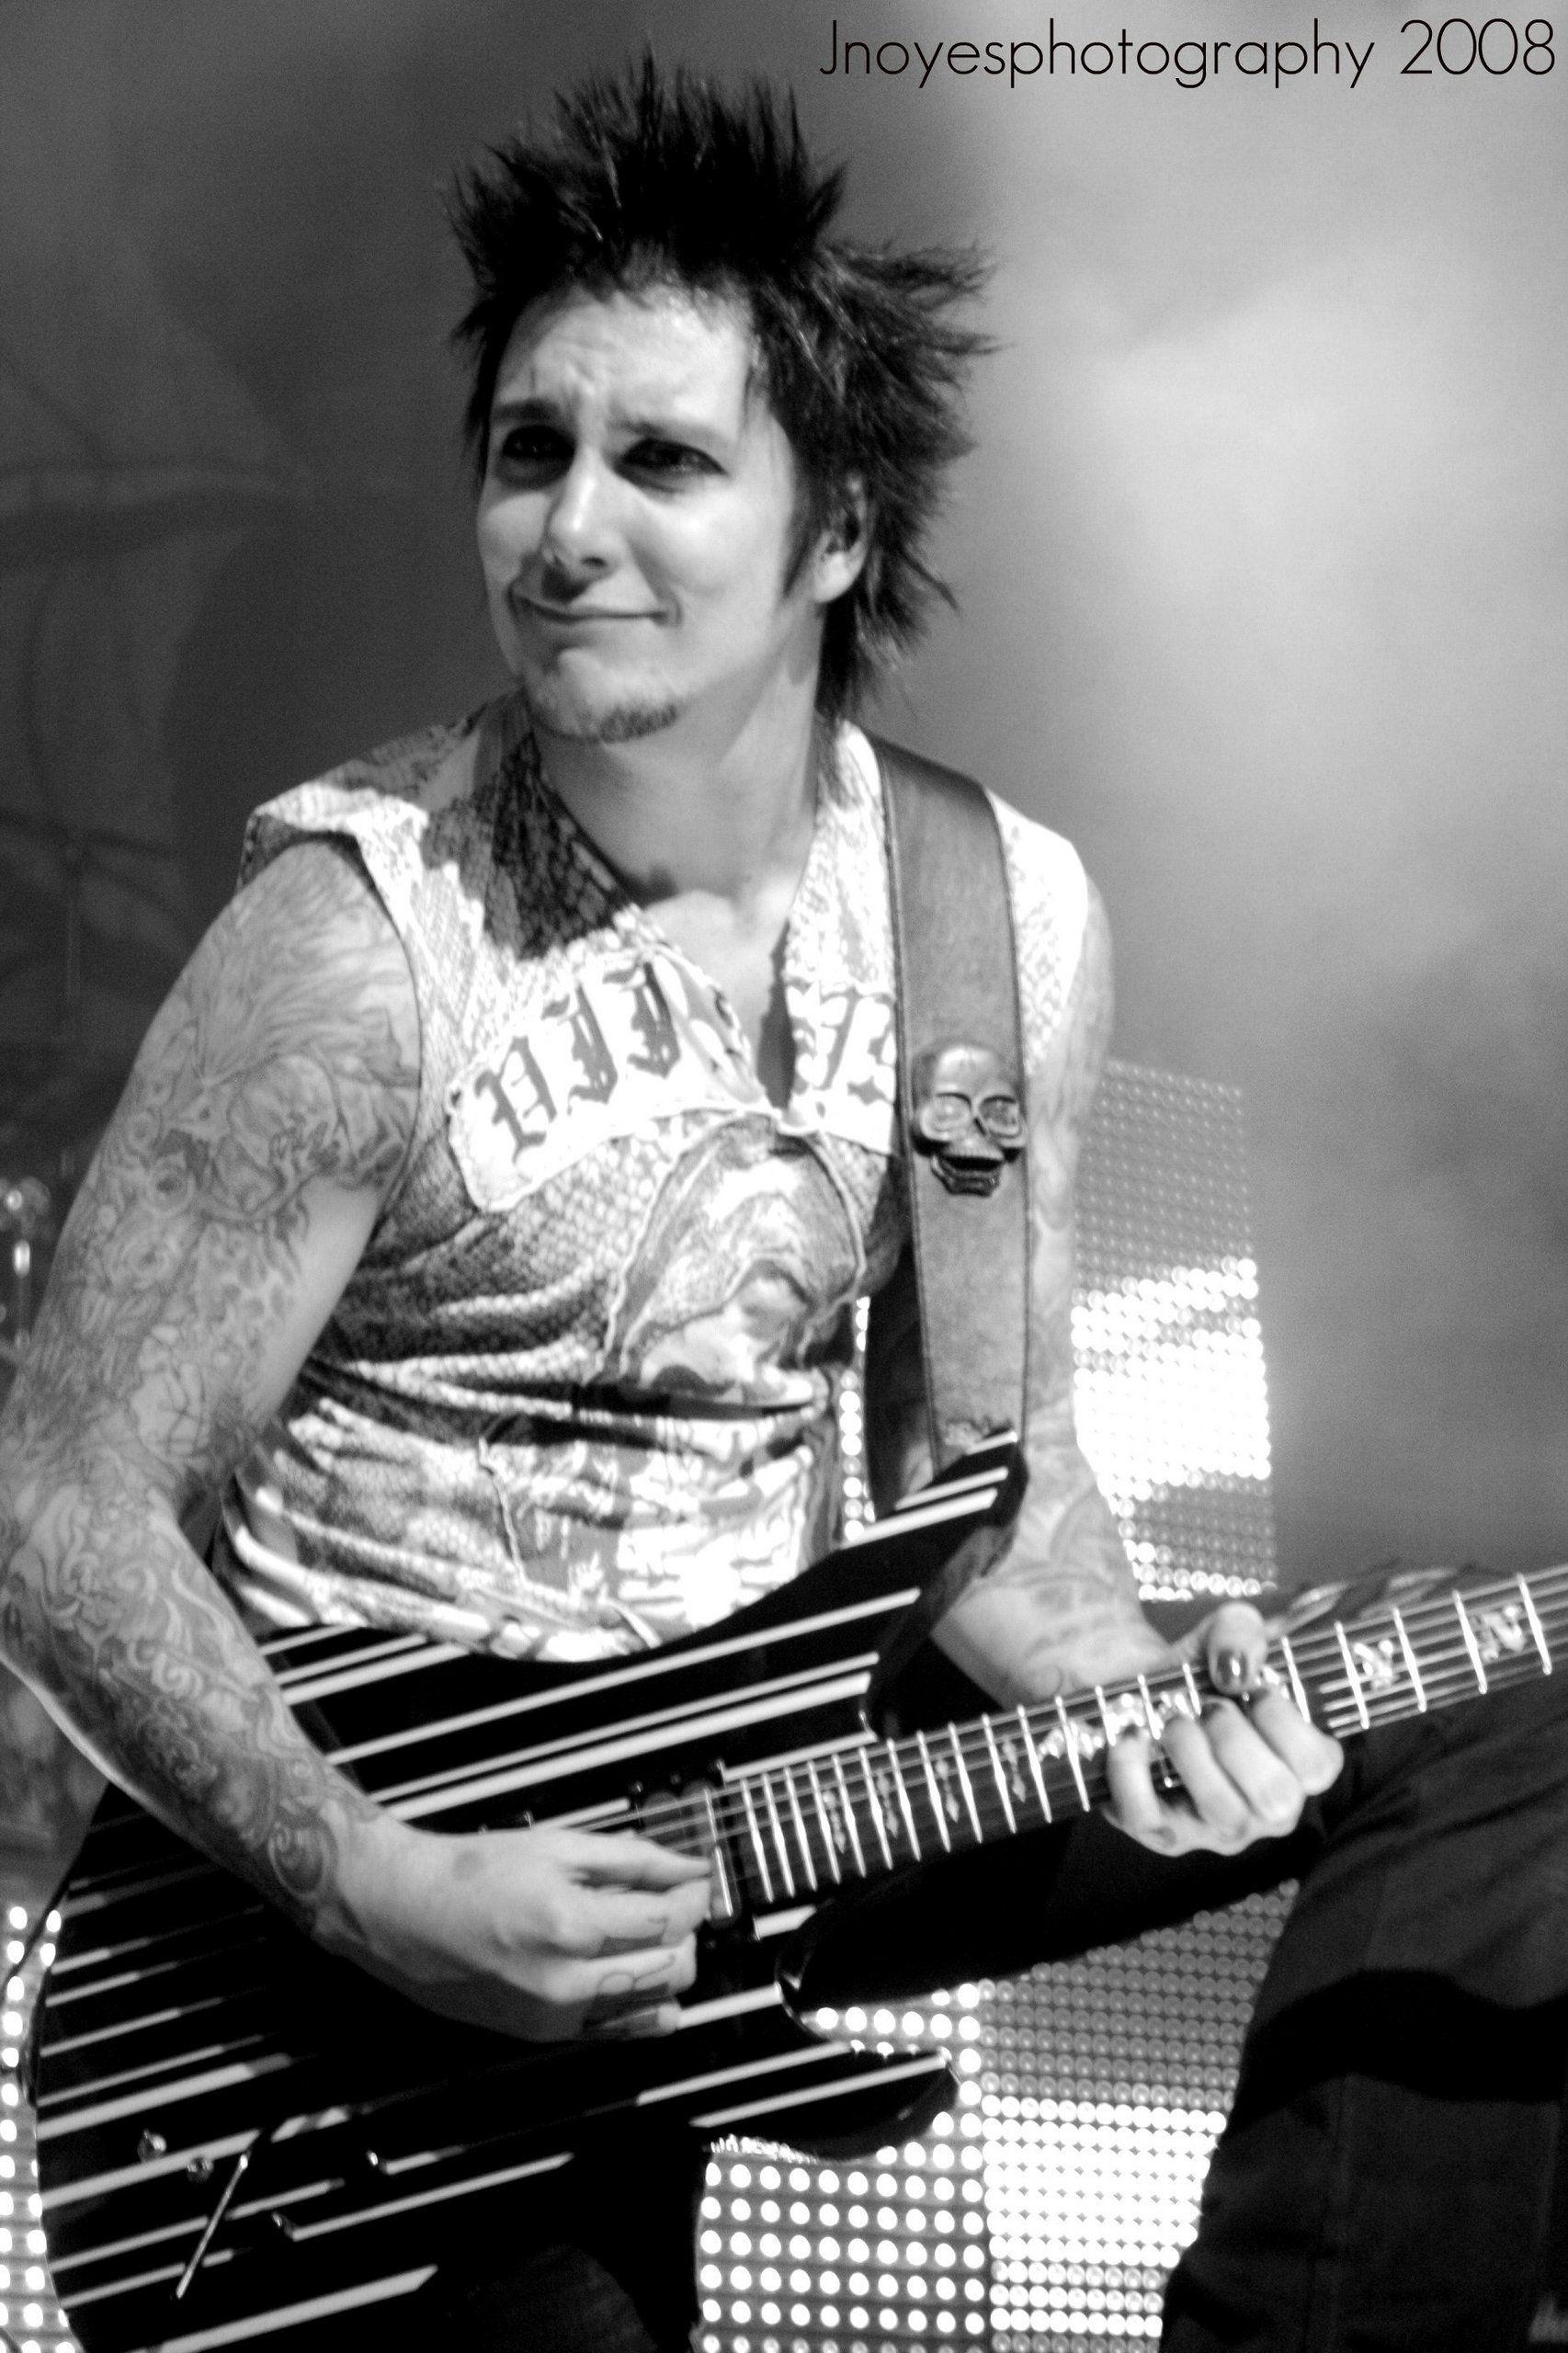 The many goofy expressions of Synyster Gates. Avenged Sevenfold